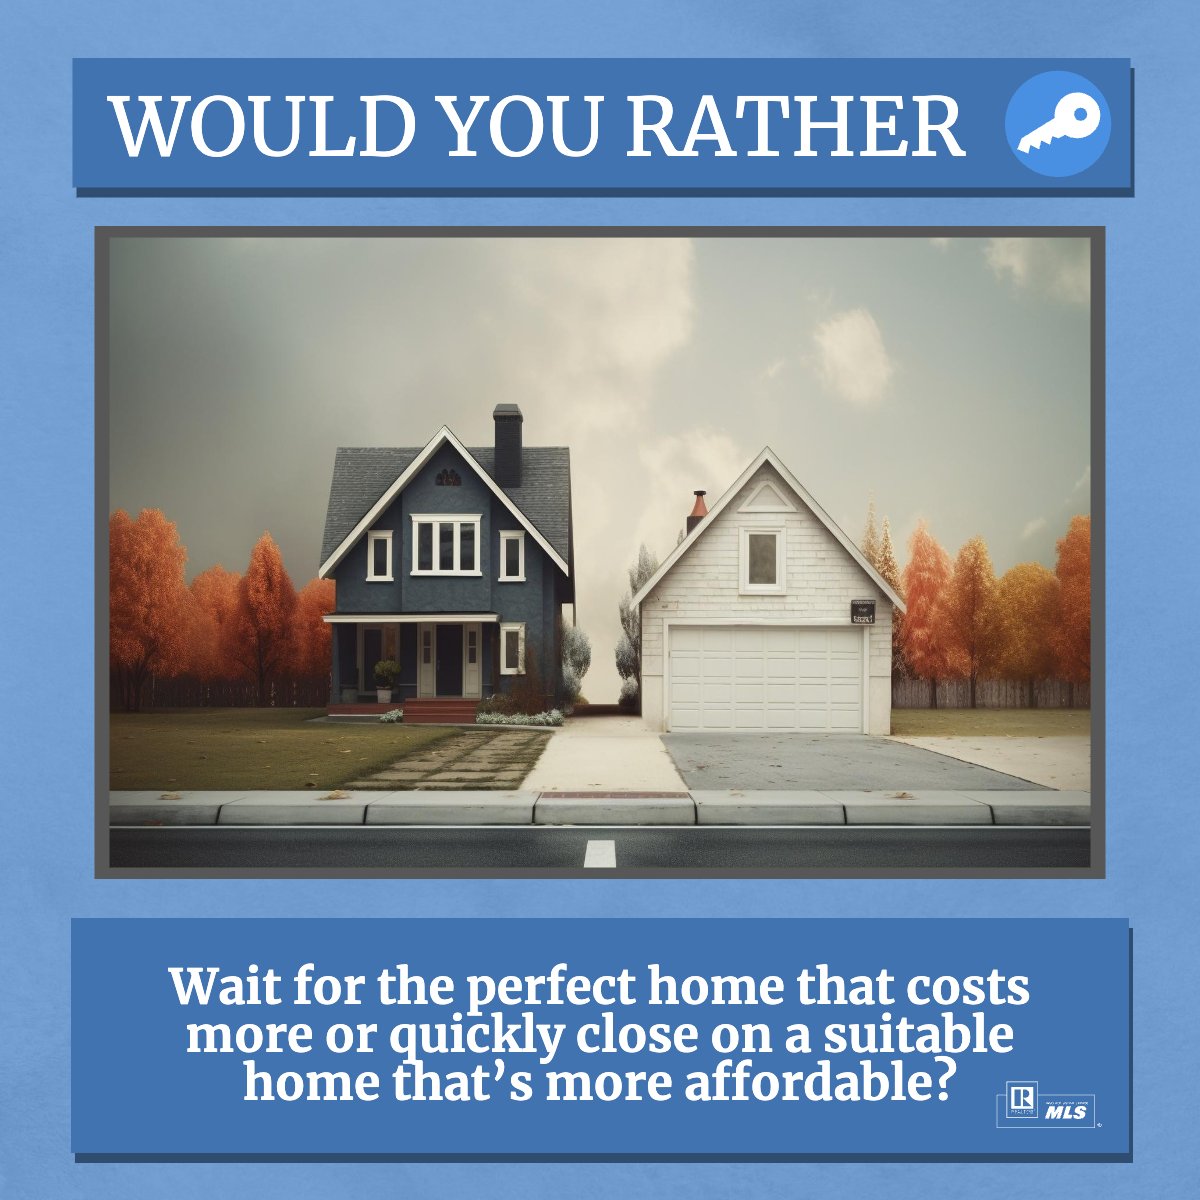 Finding the perfect home is always the goal; however, if you were given the option, what would you choose? 

Share it below!

#wouldyourather #realestatequestions